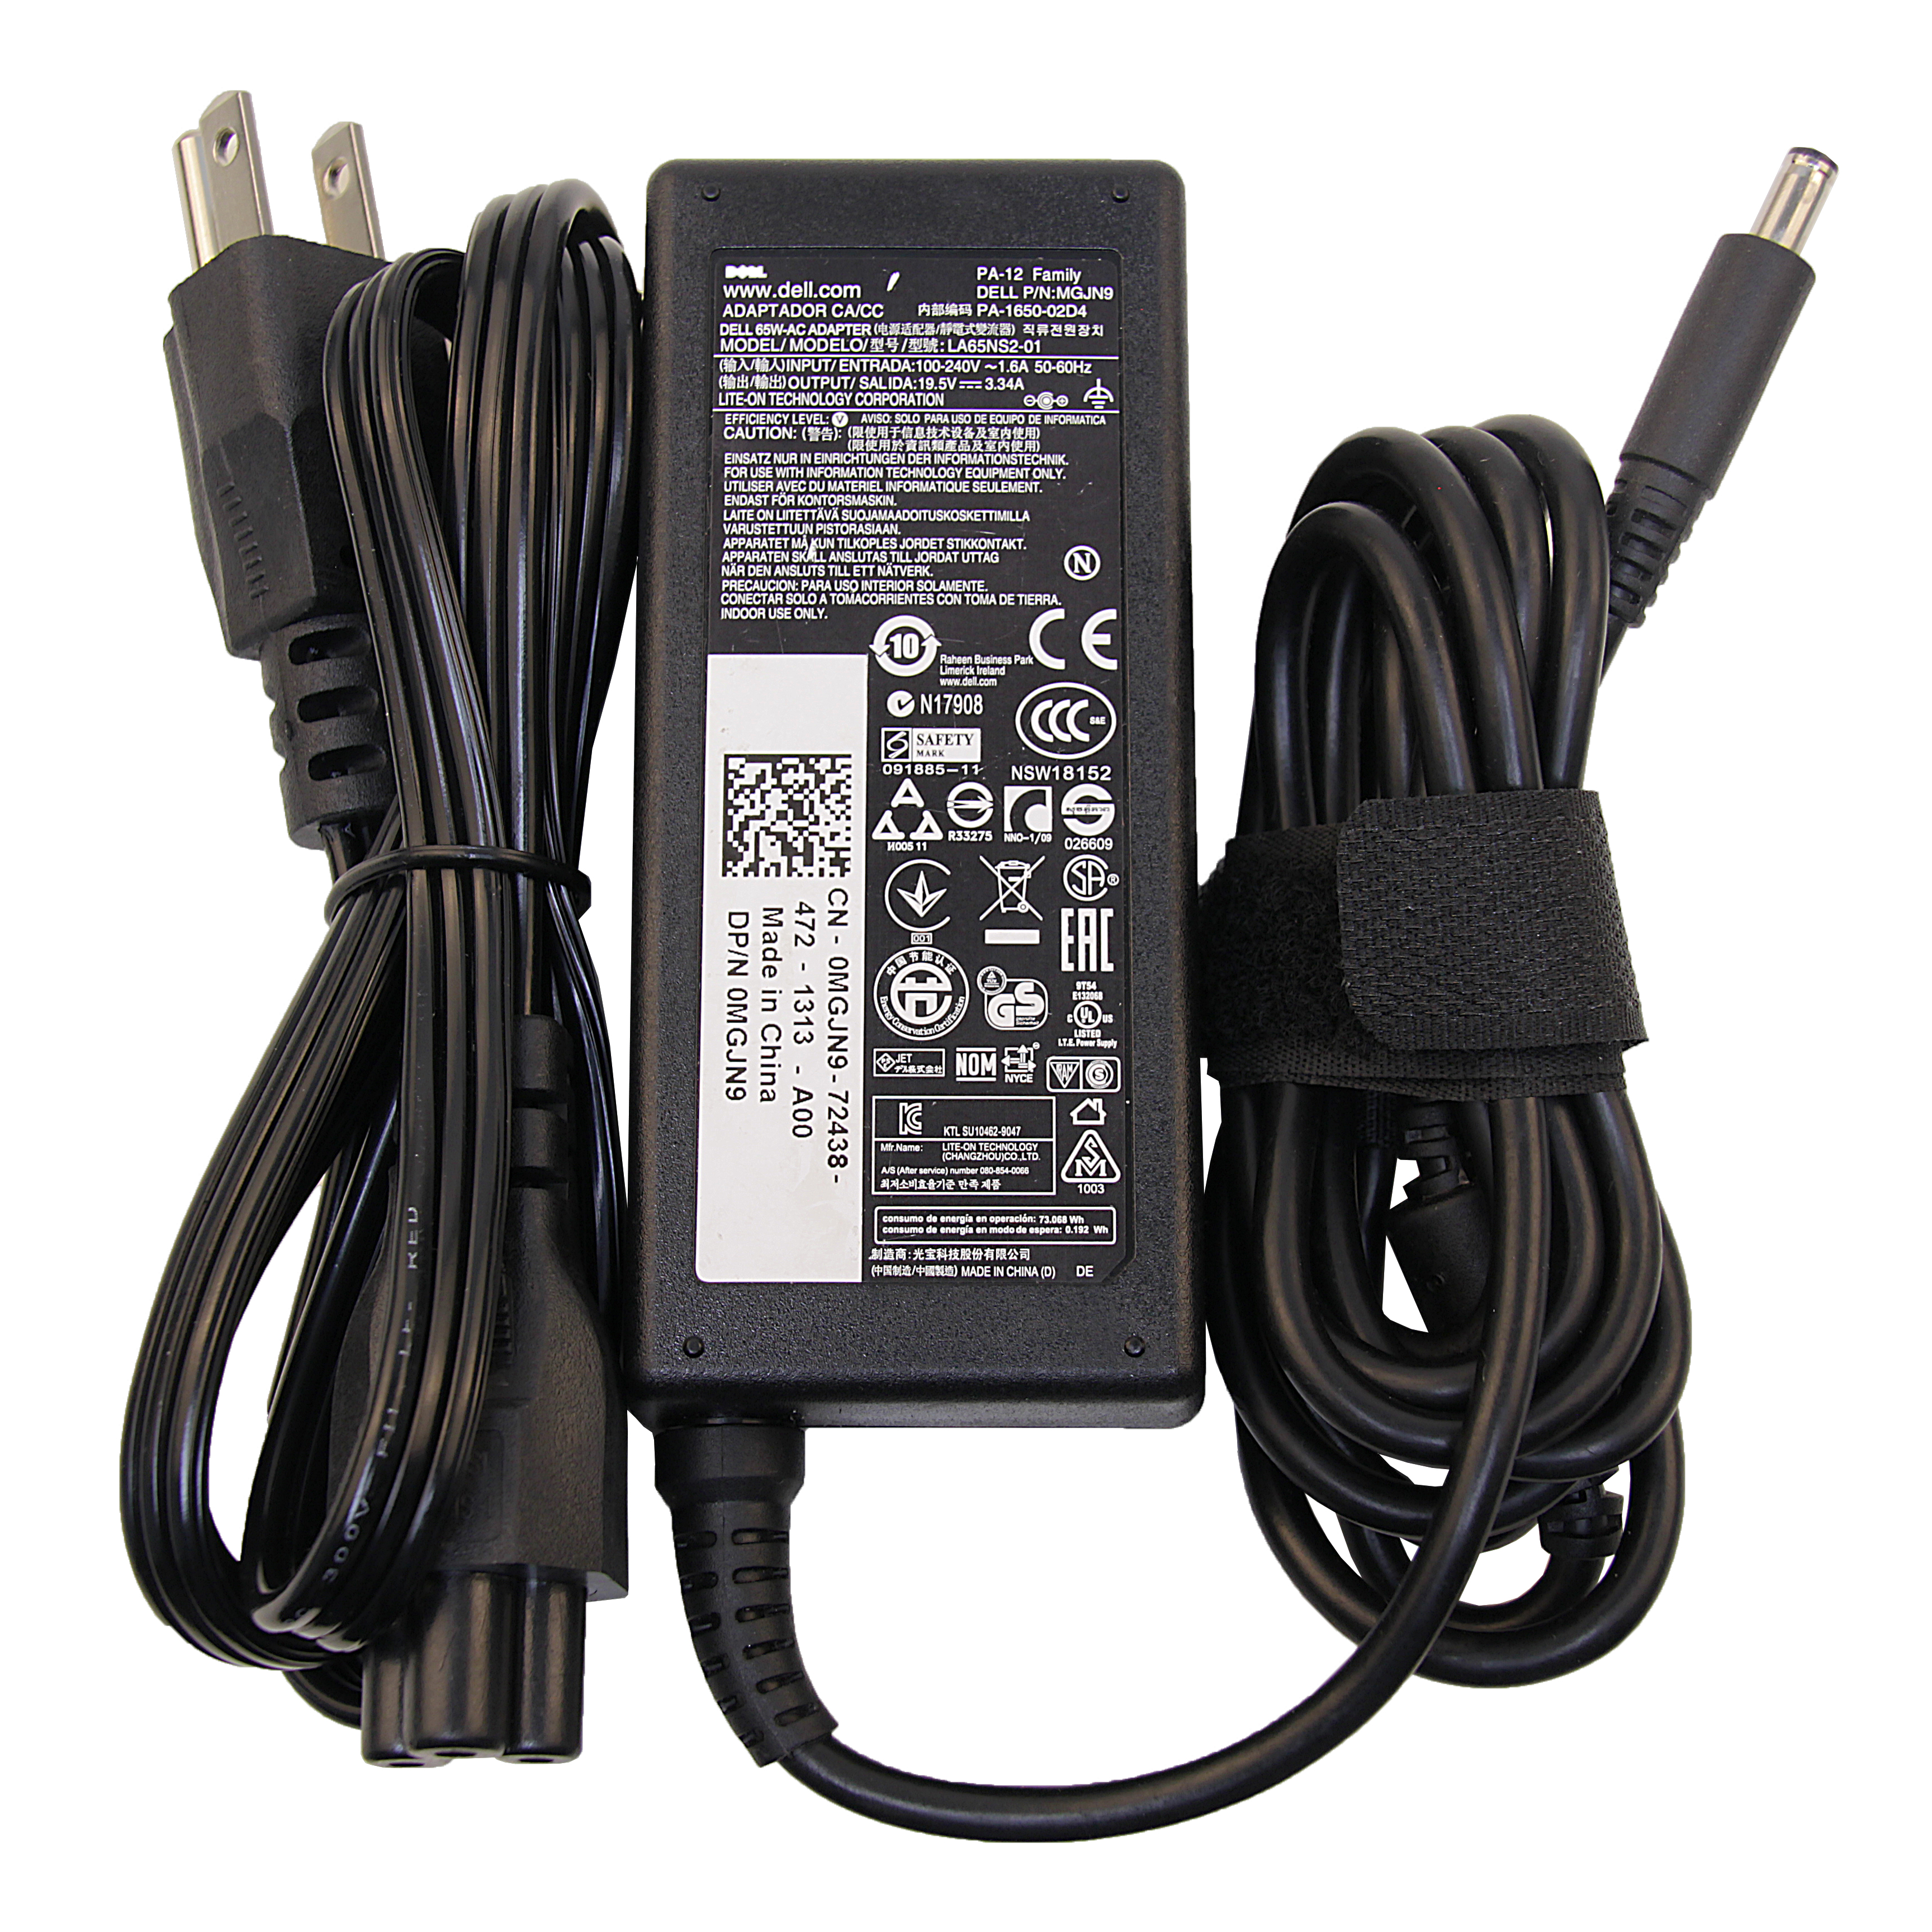 Original Oem Dell Ac Charger Power Adapter Cord For Inspiron 15 Series